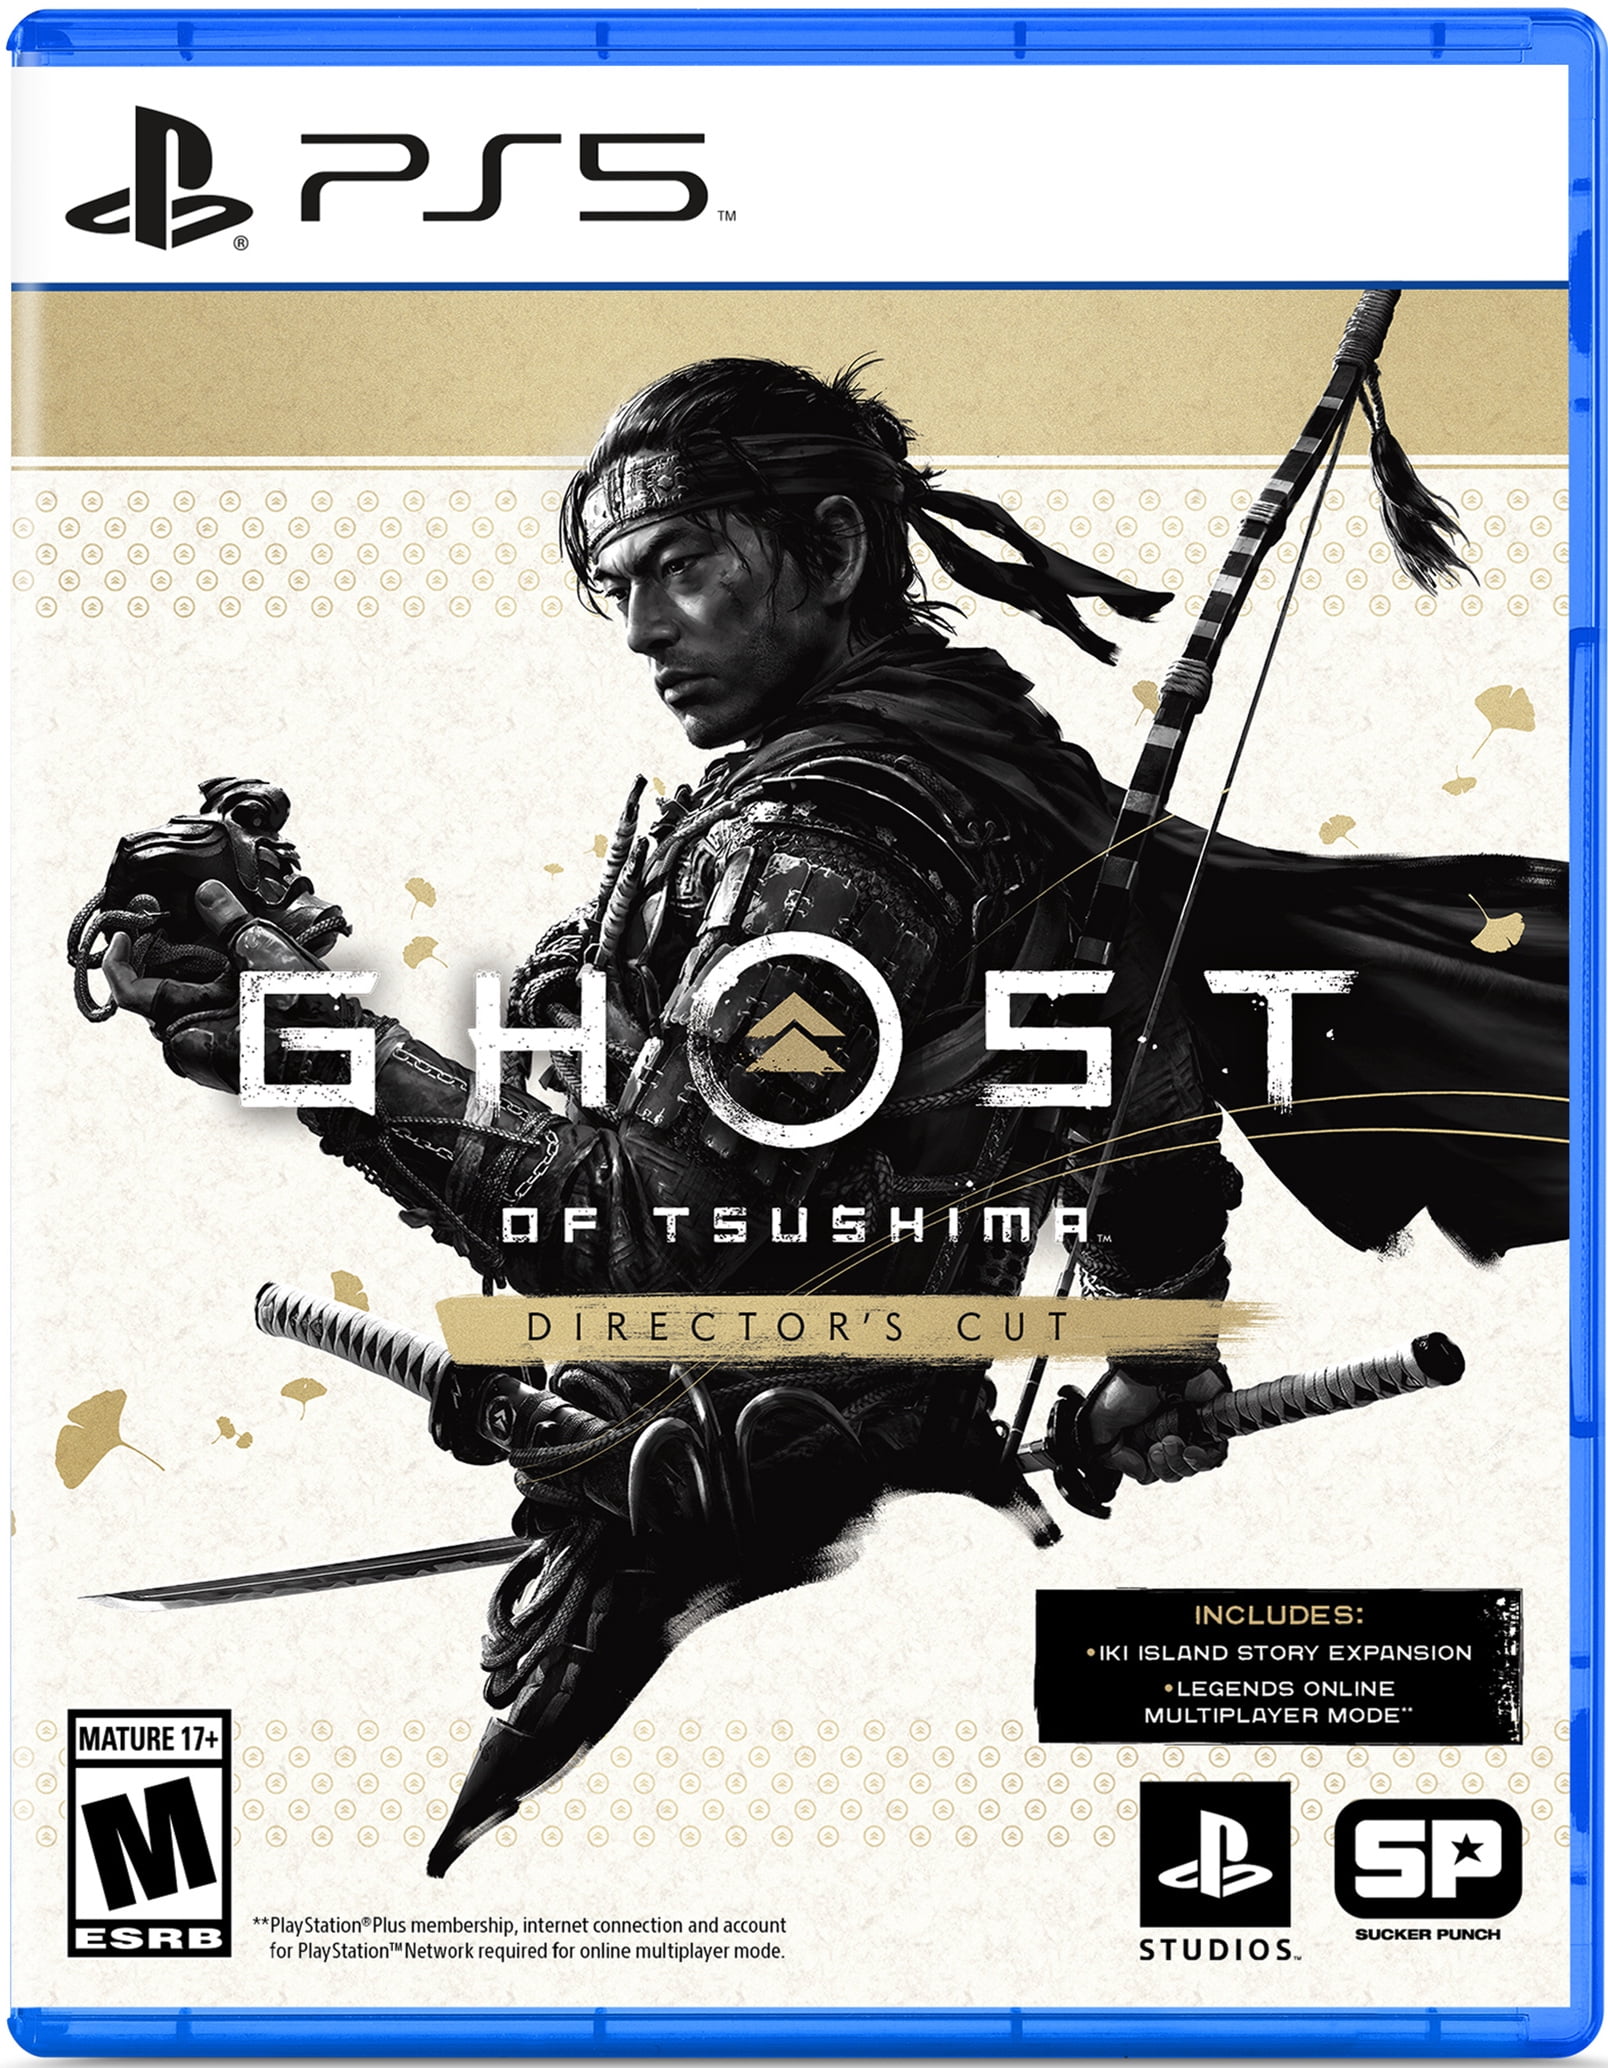 Could Ghost of Tsushima be making its way to PC? New box art